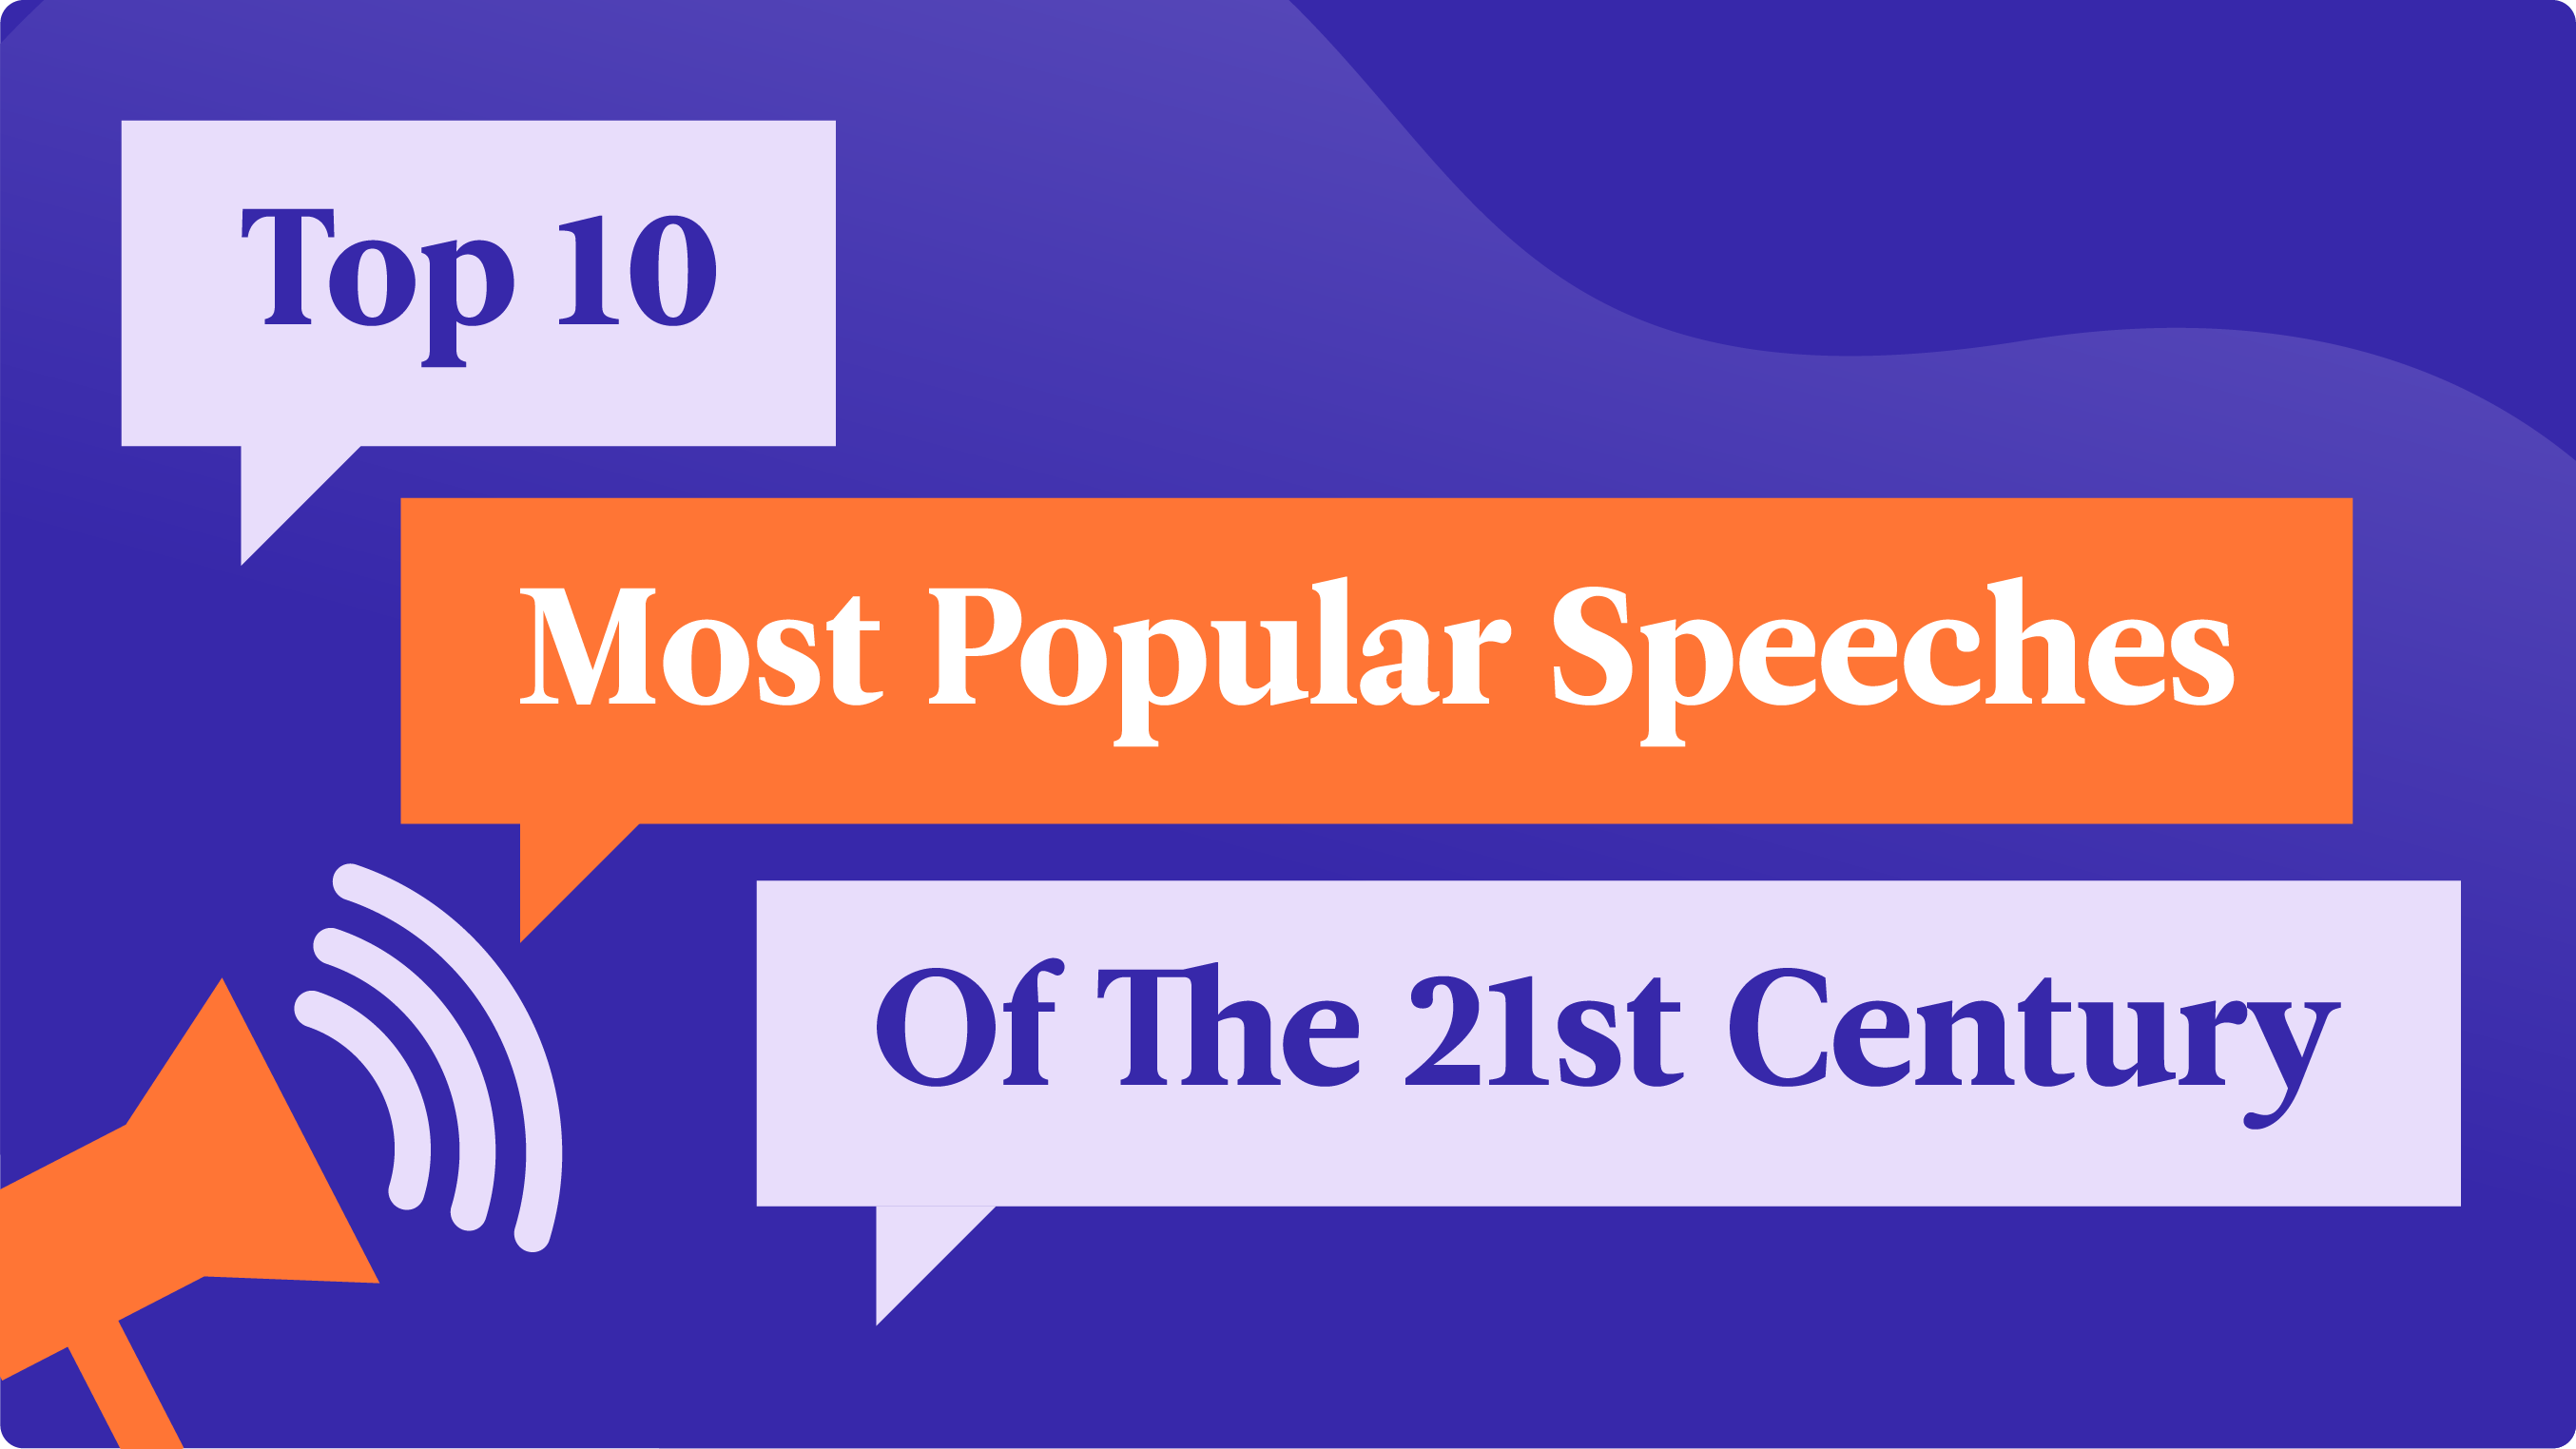 Most famous speeches